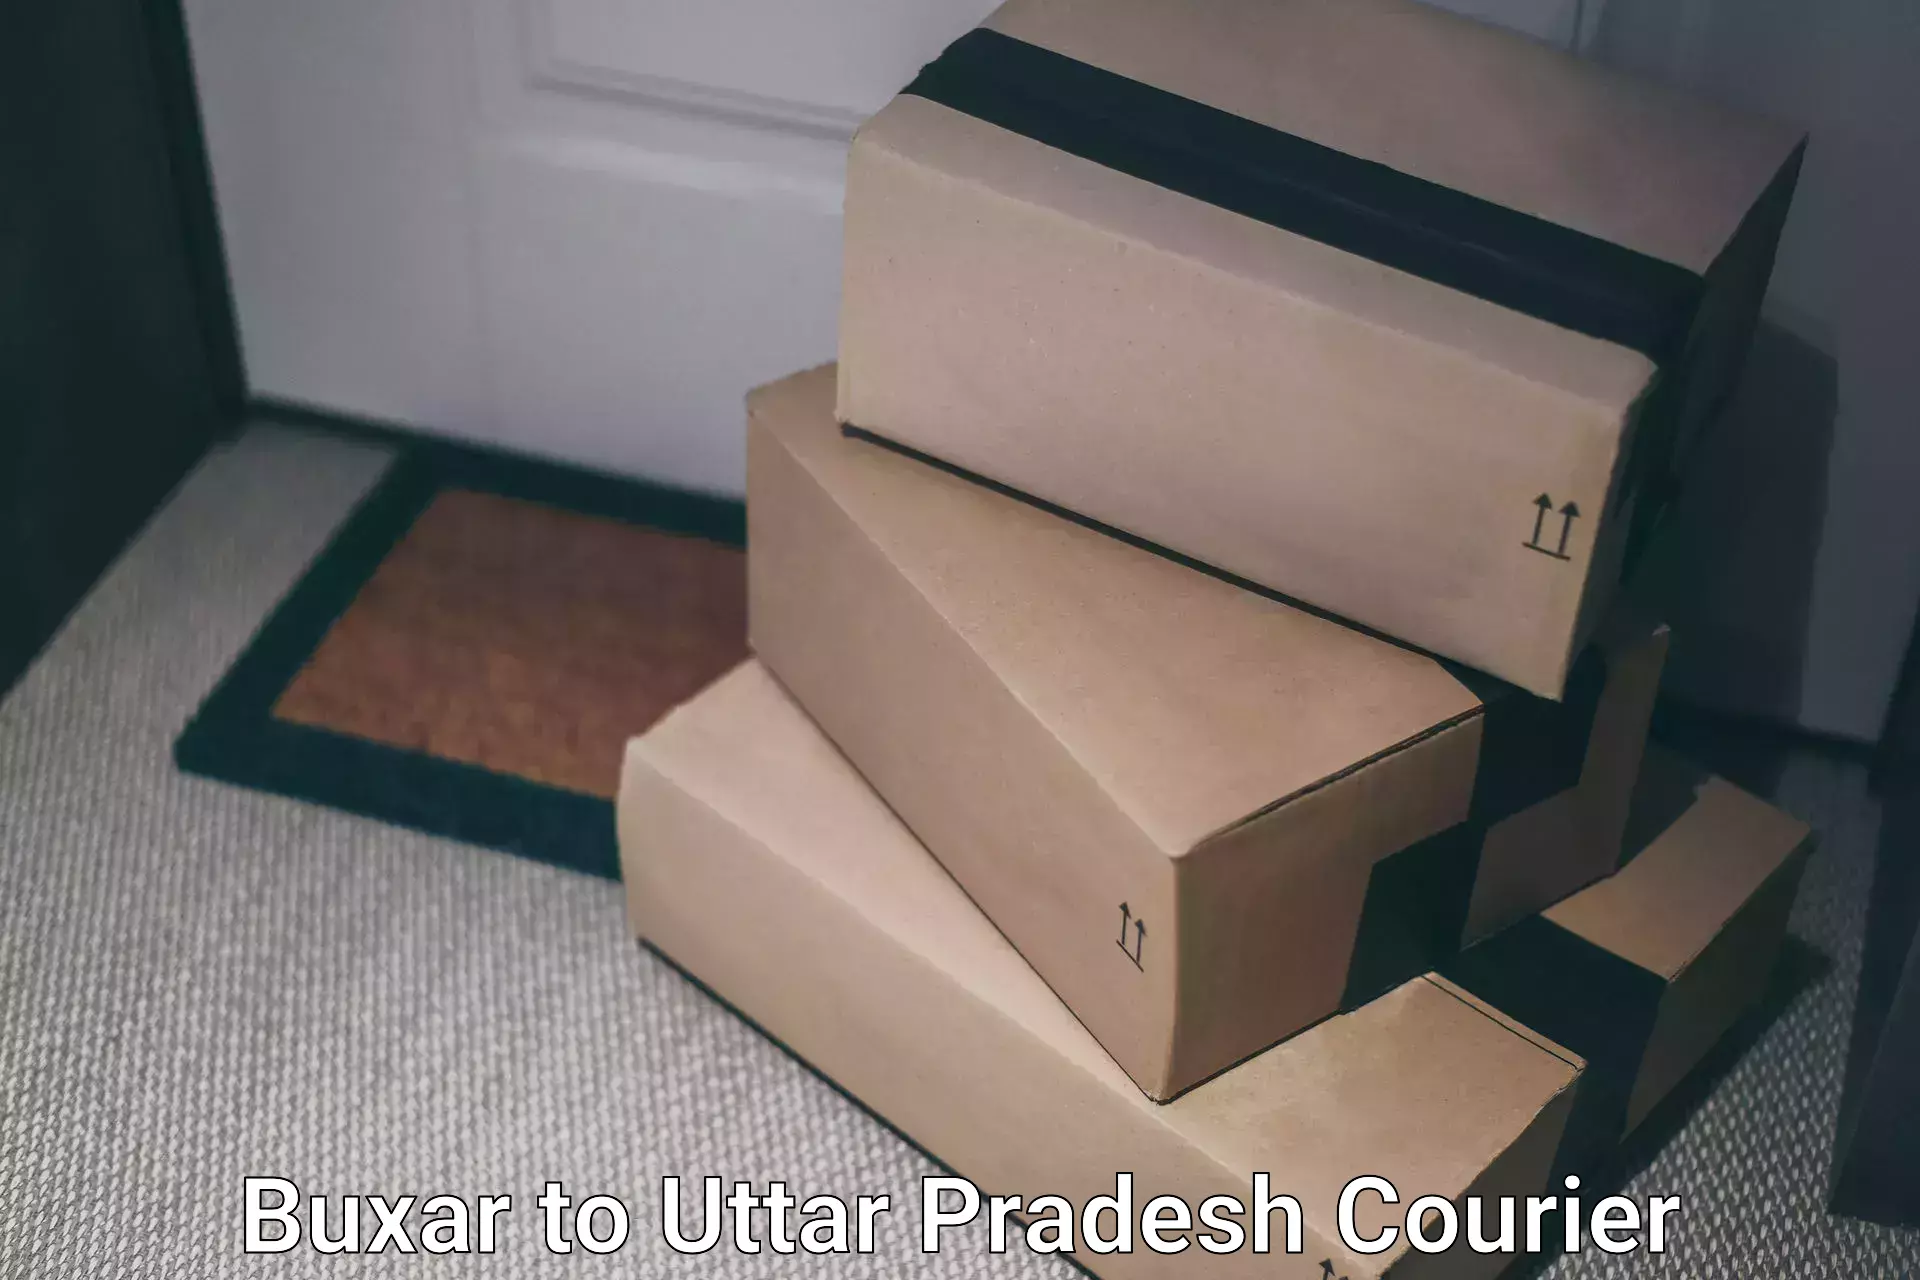 Professional parcel services Buxar to Mawana